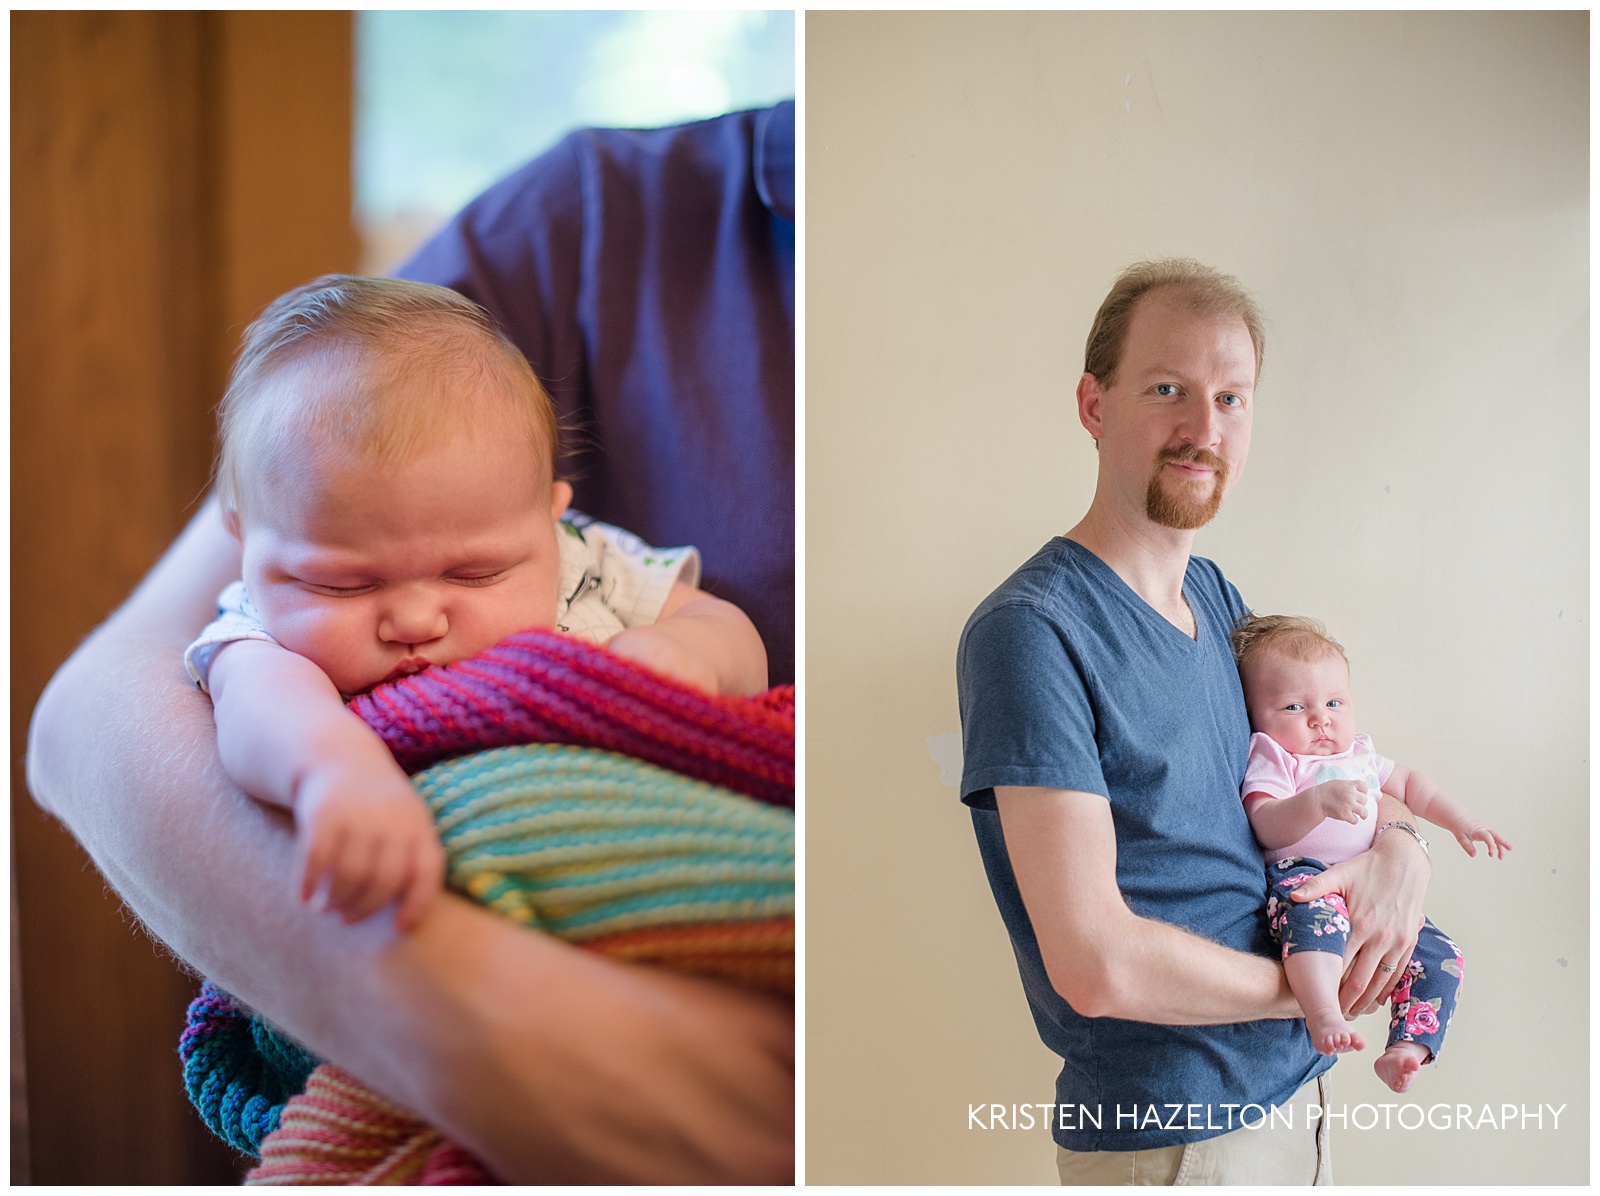 Family photography - collage of sleeping and awake baby in Dad's arms